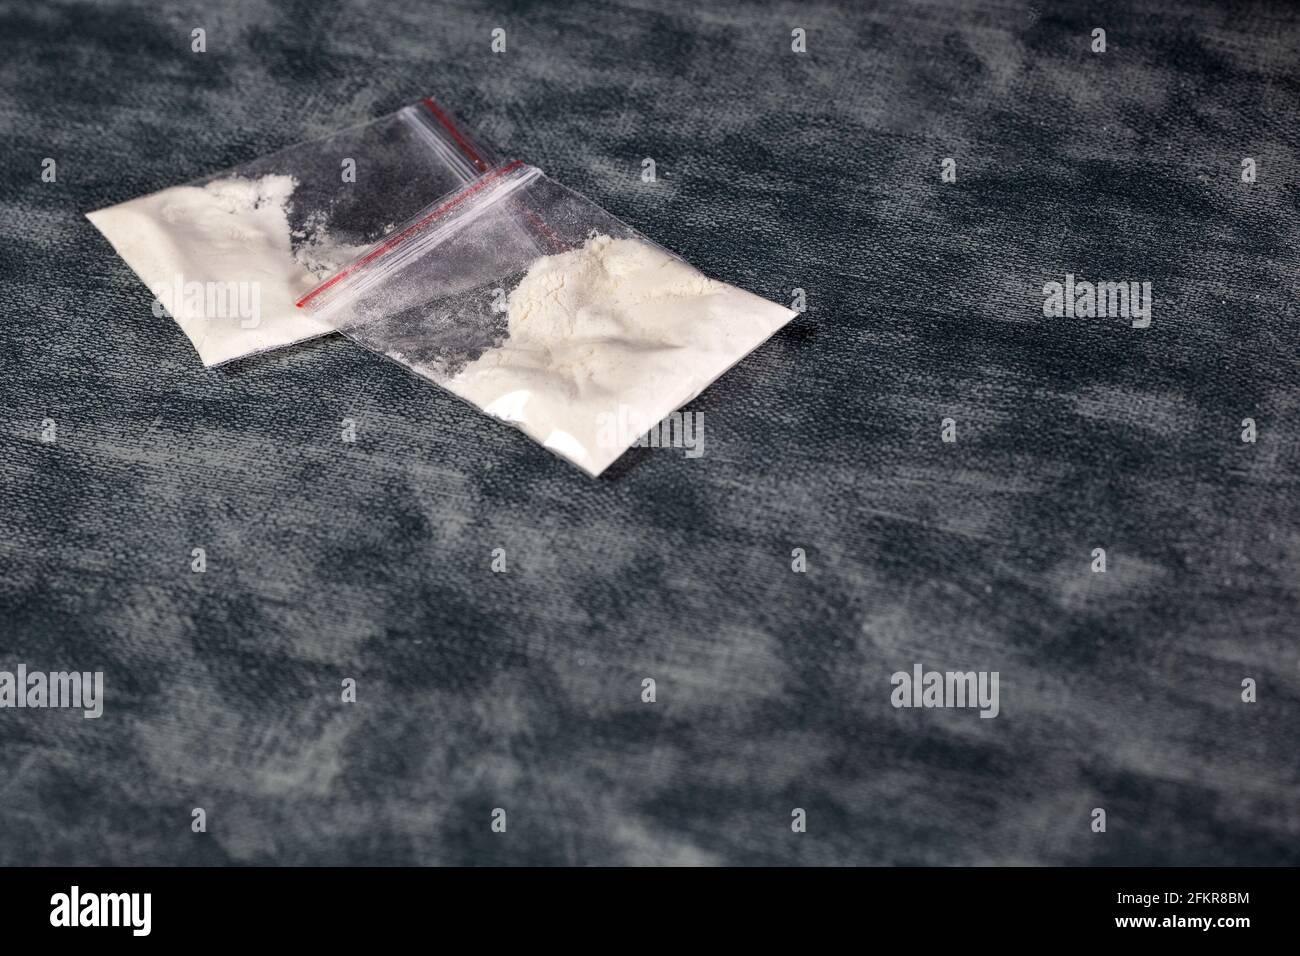 Transparent plastic bags with white powder, cocaine,speed or other drugs on gray background with copy space, dealing,drug,junky,addiction concept Stock Photo